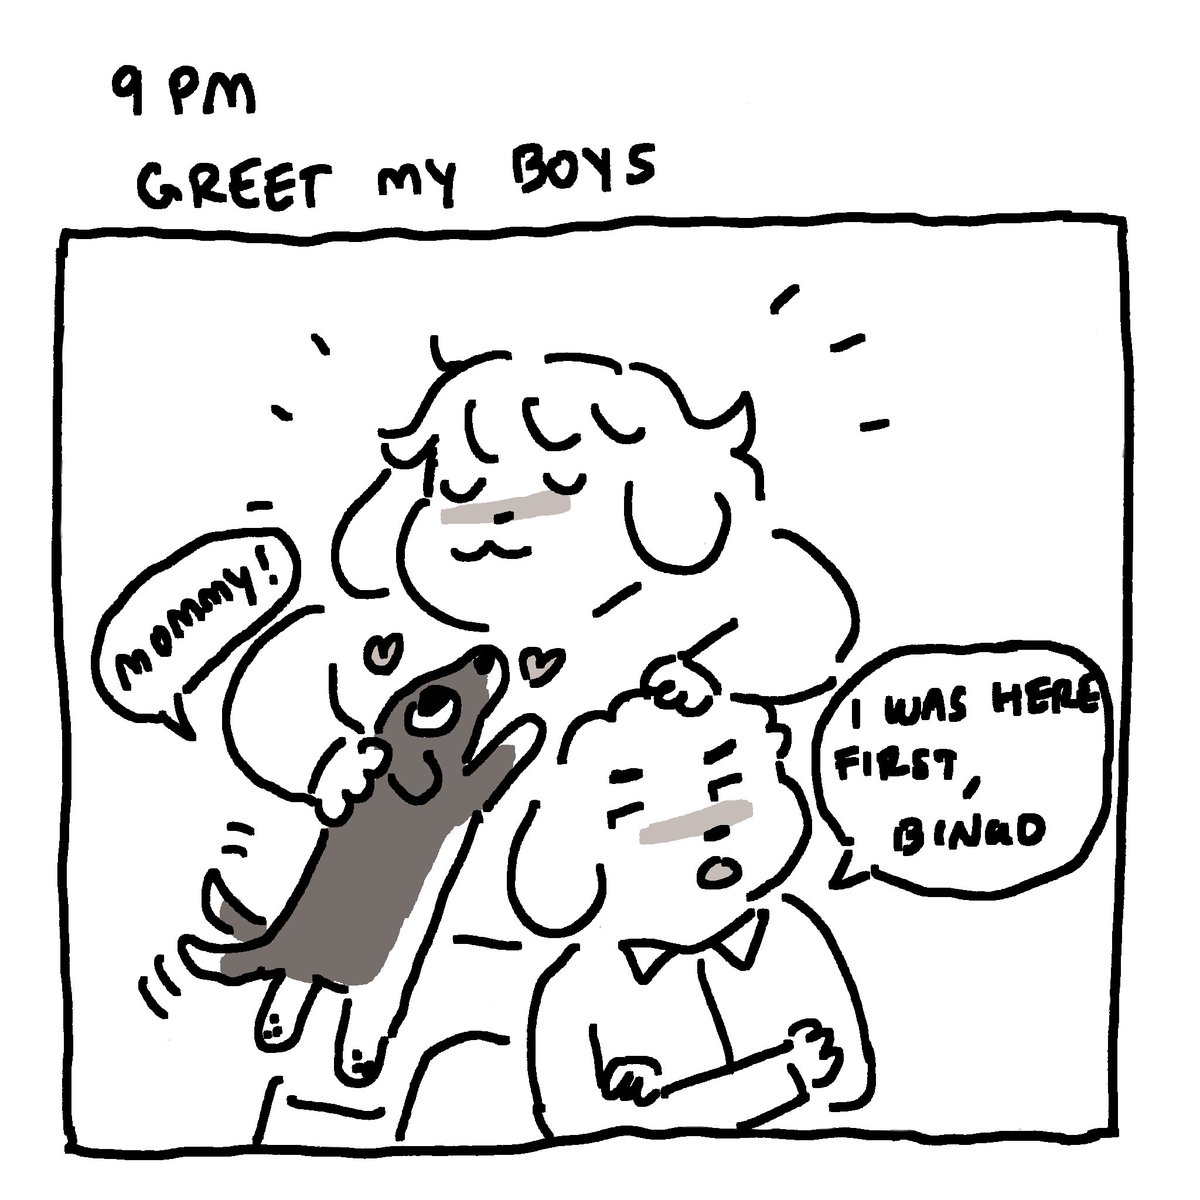 MORE hourlies! as you can see I am so athletic and cool for going to the gym 